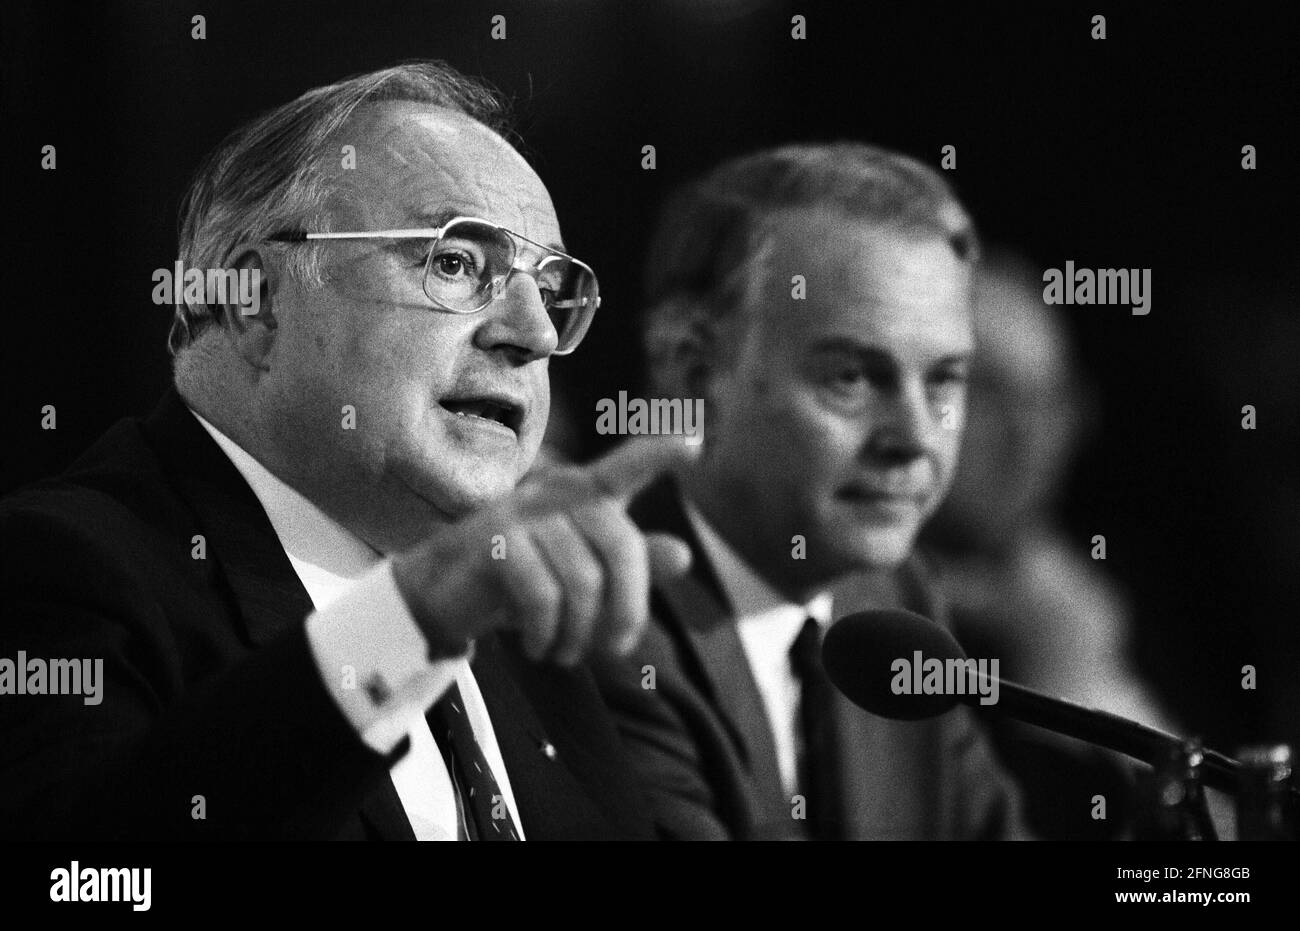 Germany, Hanover, 13.10.1989. Archive No: 09-62-21 CDU state party conference Lower Saxony Photo: CDU Federal Chairman Helmut Kohl and Ernst Albrecht, Minister President of Lower Saxony [automated translation] Stock Photo